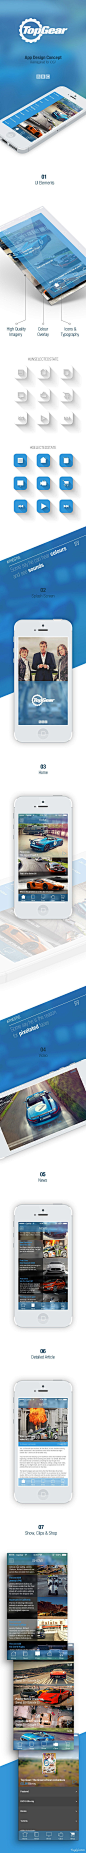 Top Gear Tribute iOS7 Redesign Concept